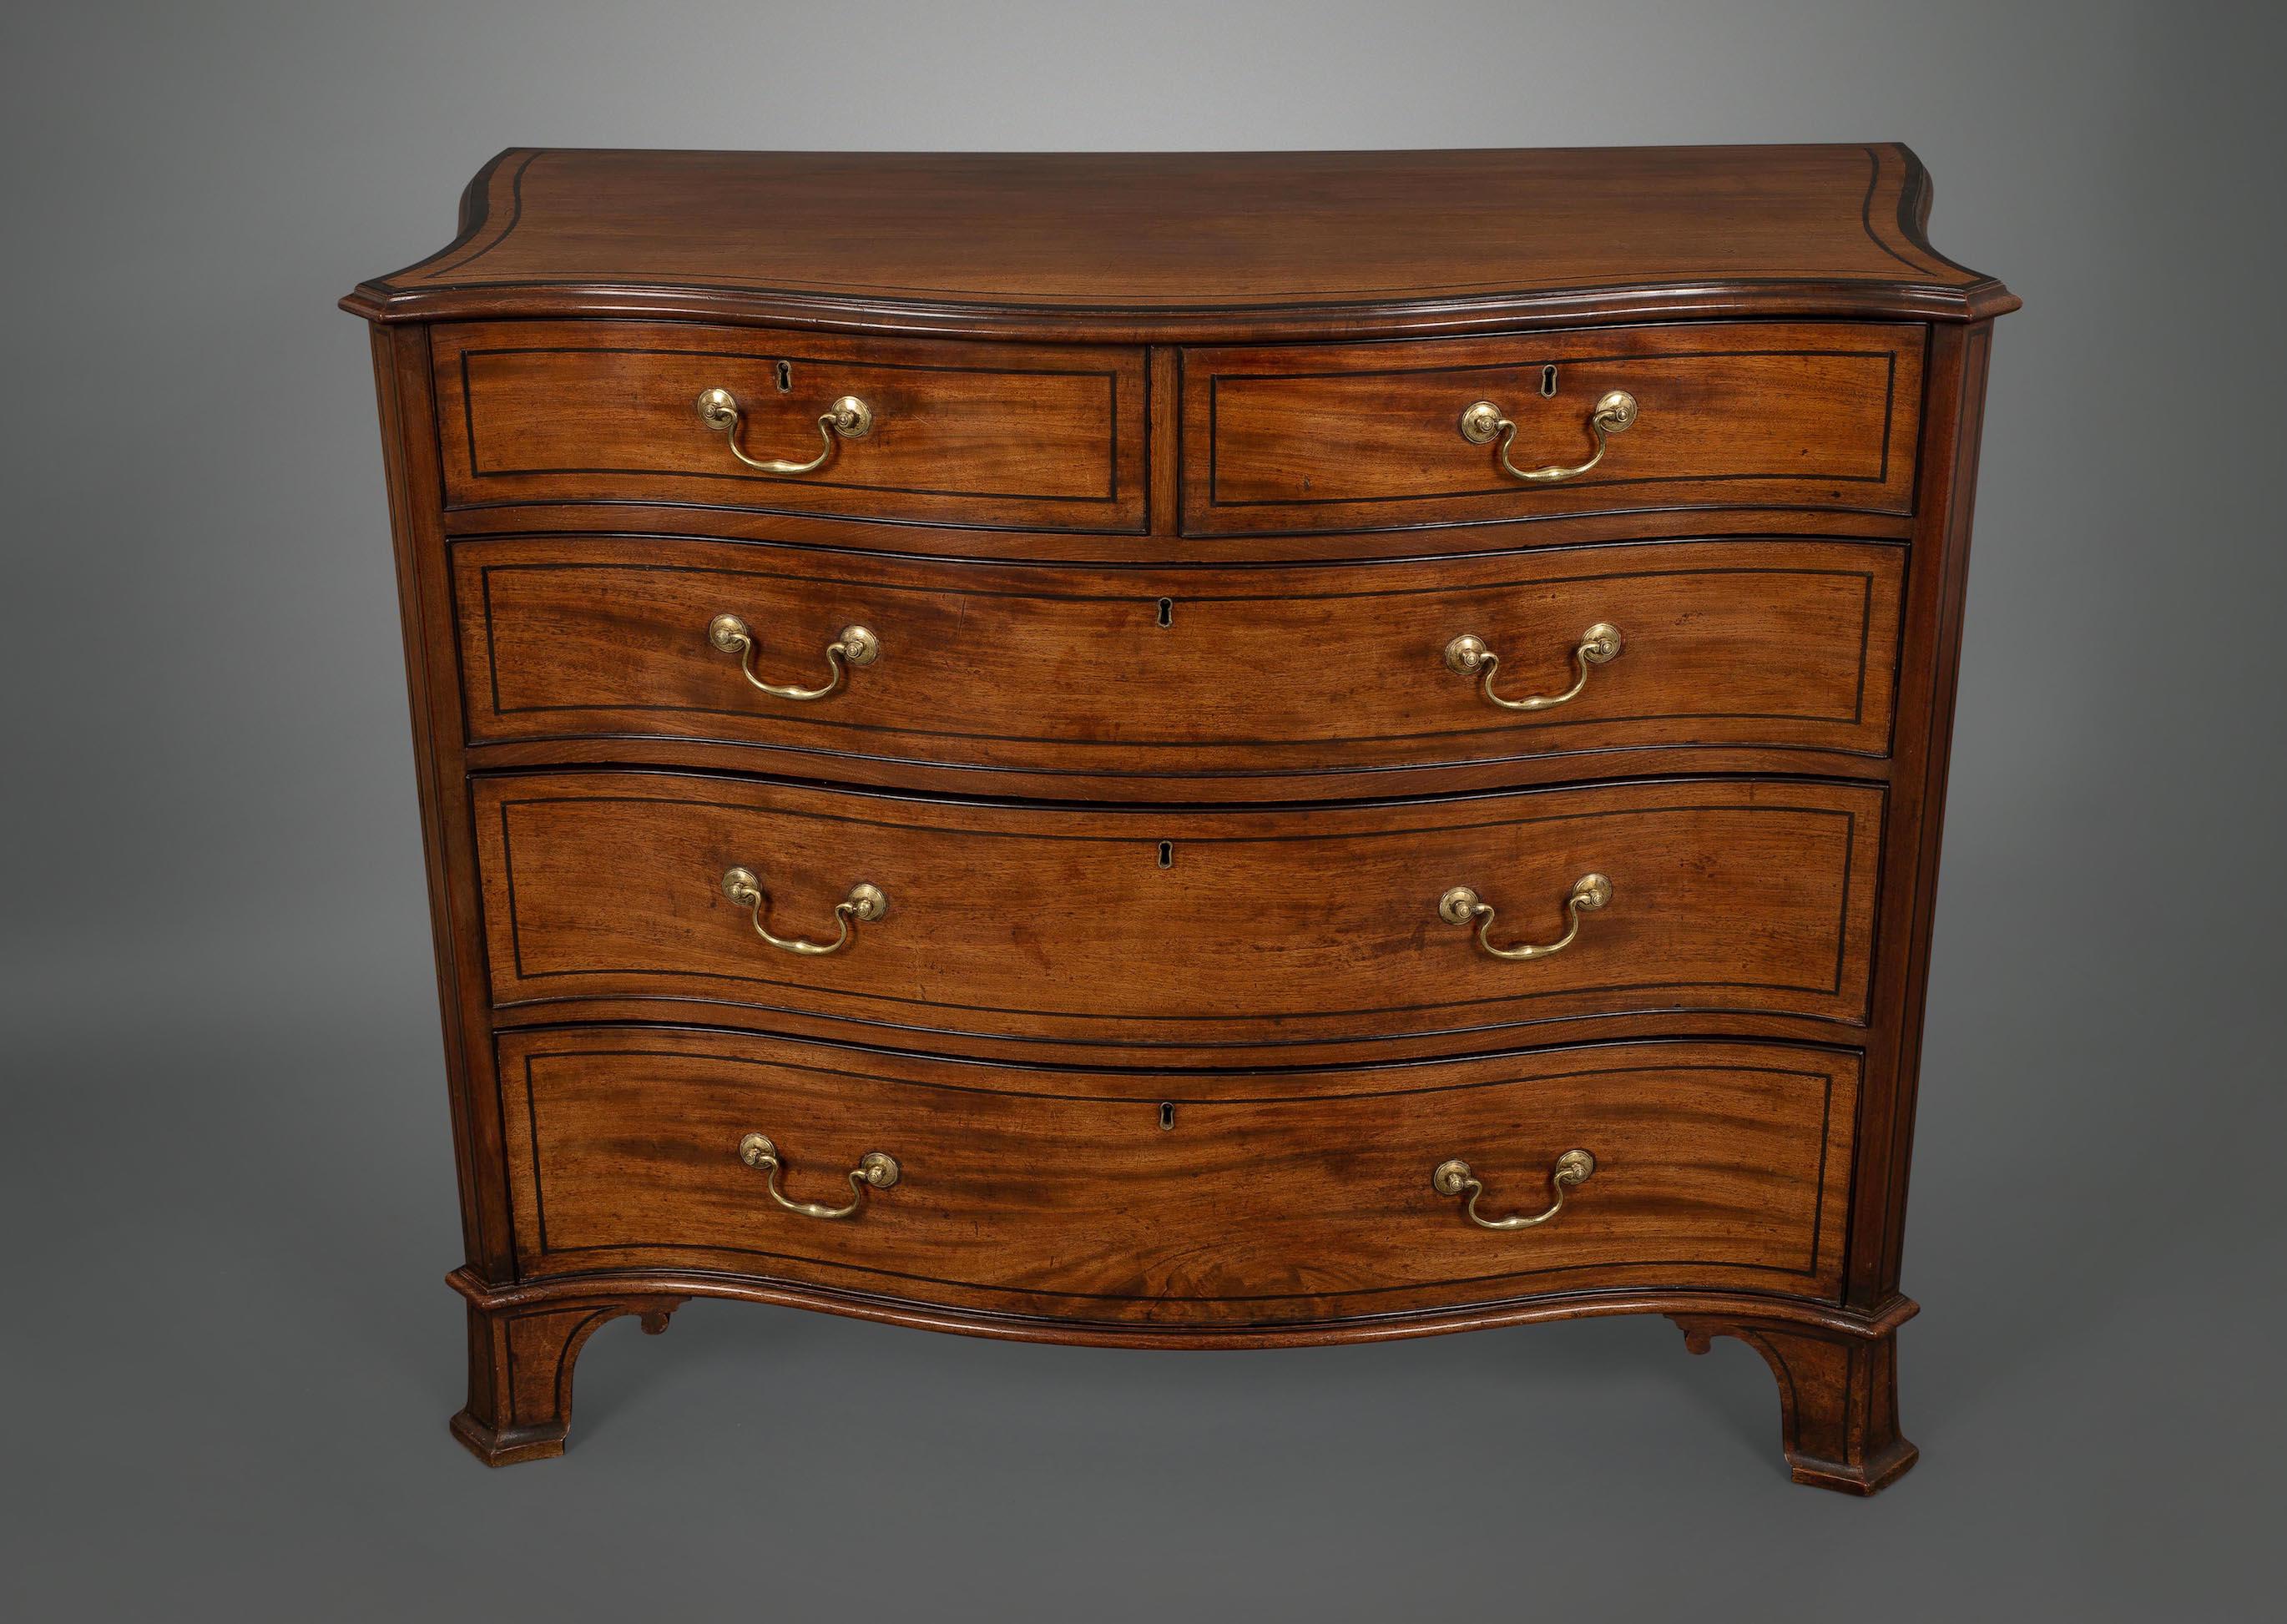 English George III Period Serpentine-Fronted Chest of Drawers in the Manner of Thomas For Sale